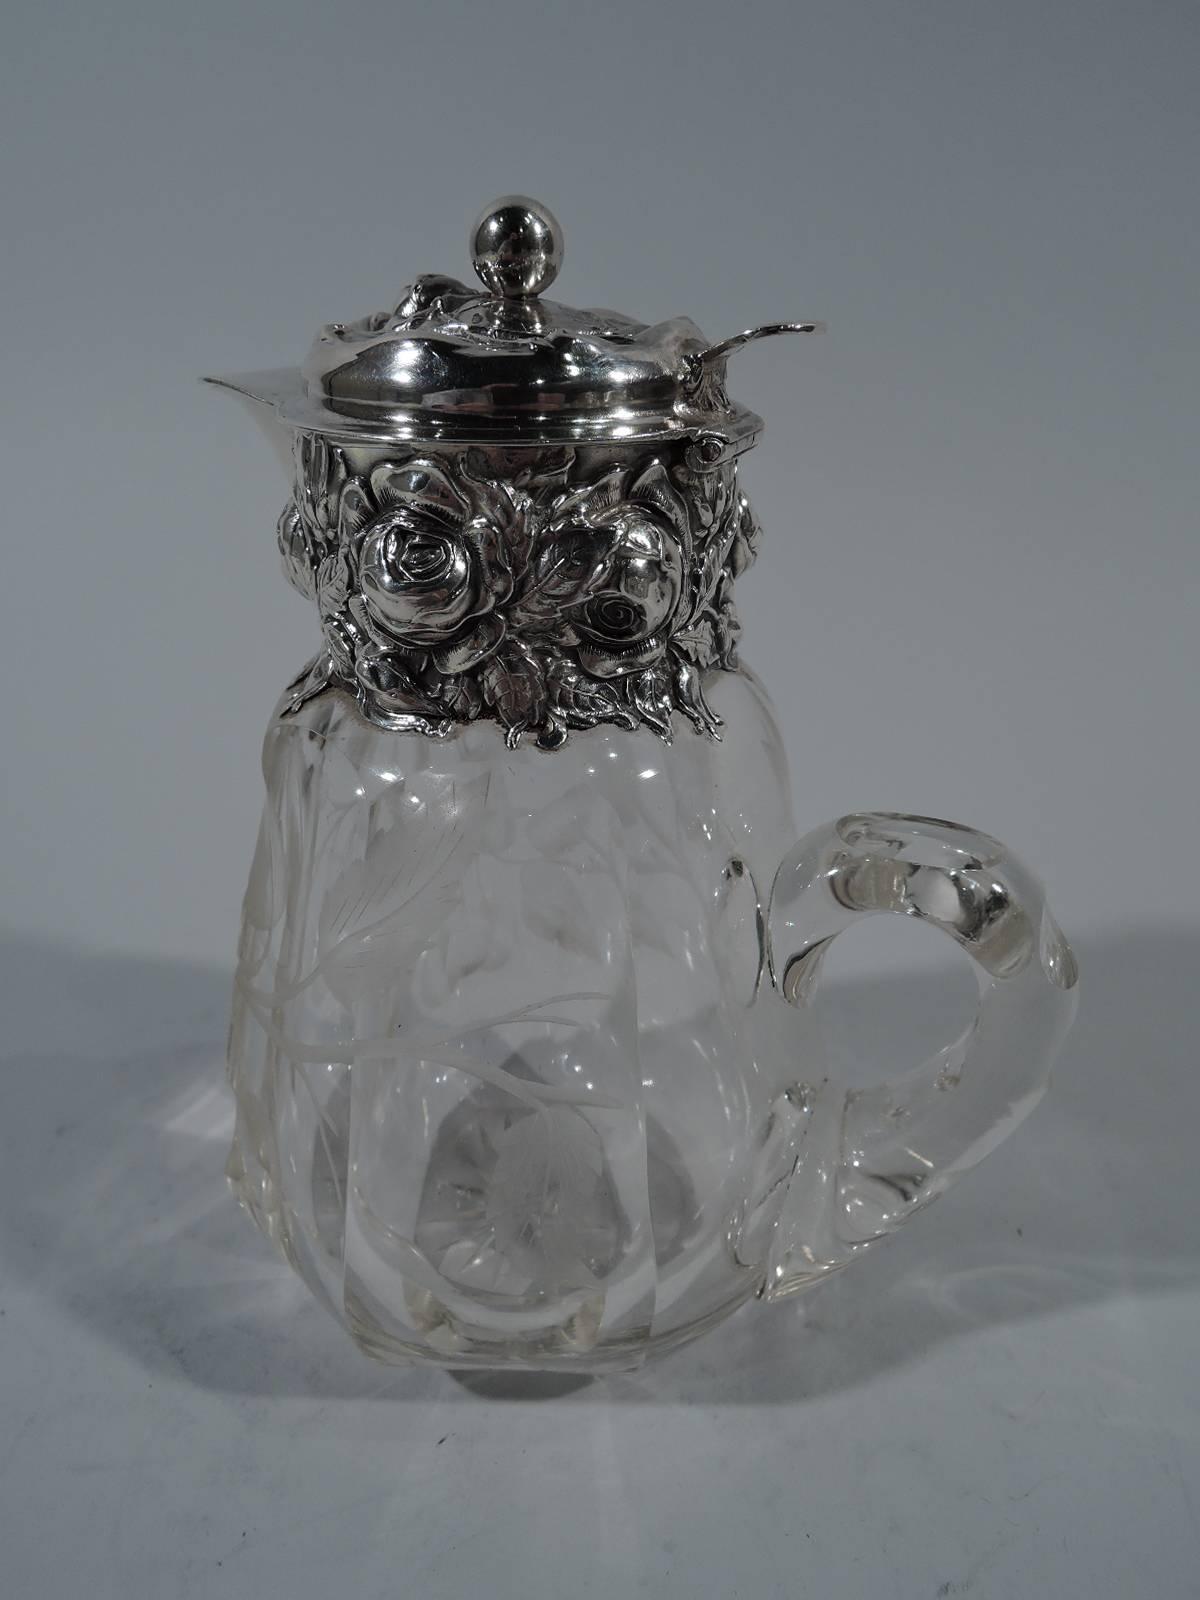 Clear glass syrup jug with sterling silver mounts. Made by Woodside in New York, circa 1900. Faceted body with acid-etched cherry branch. Notched c-scroll handle. Silver collar and hinged cover with floral repousse. Hallmark includes no. 2532.